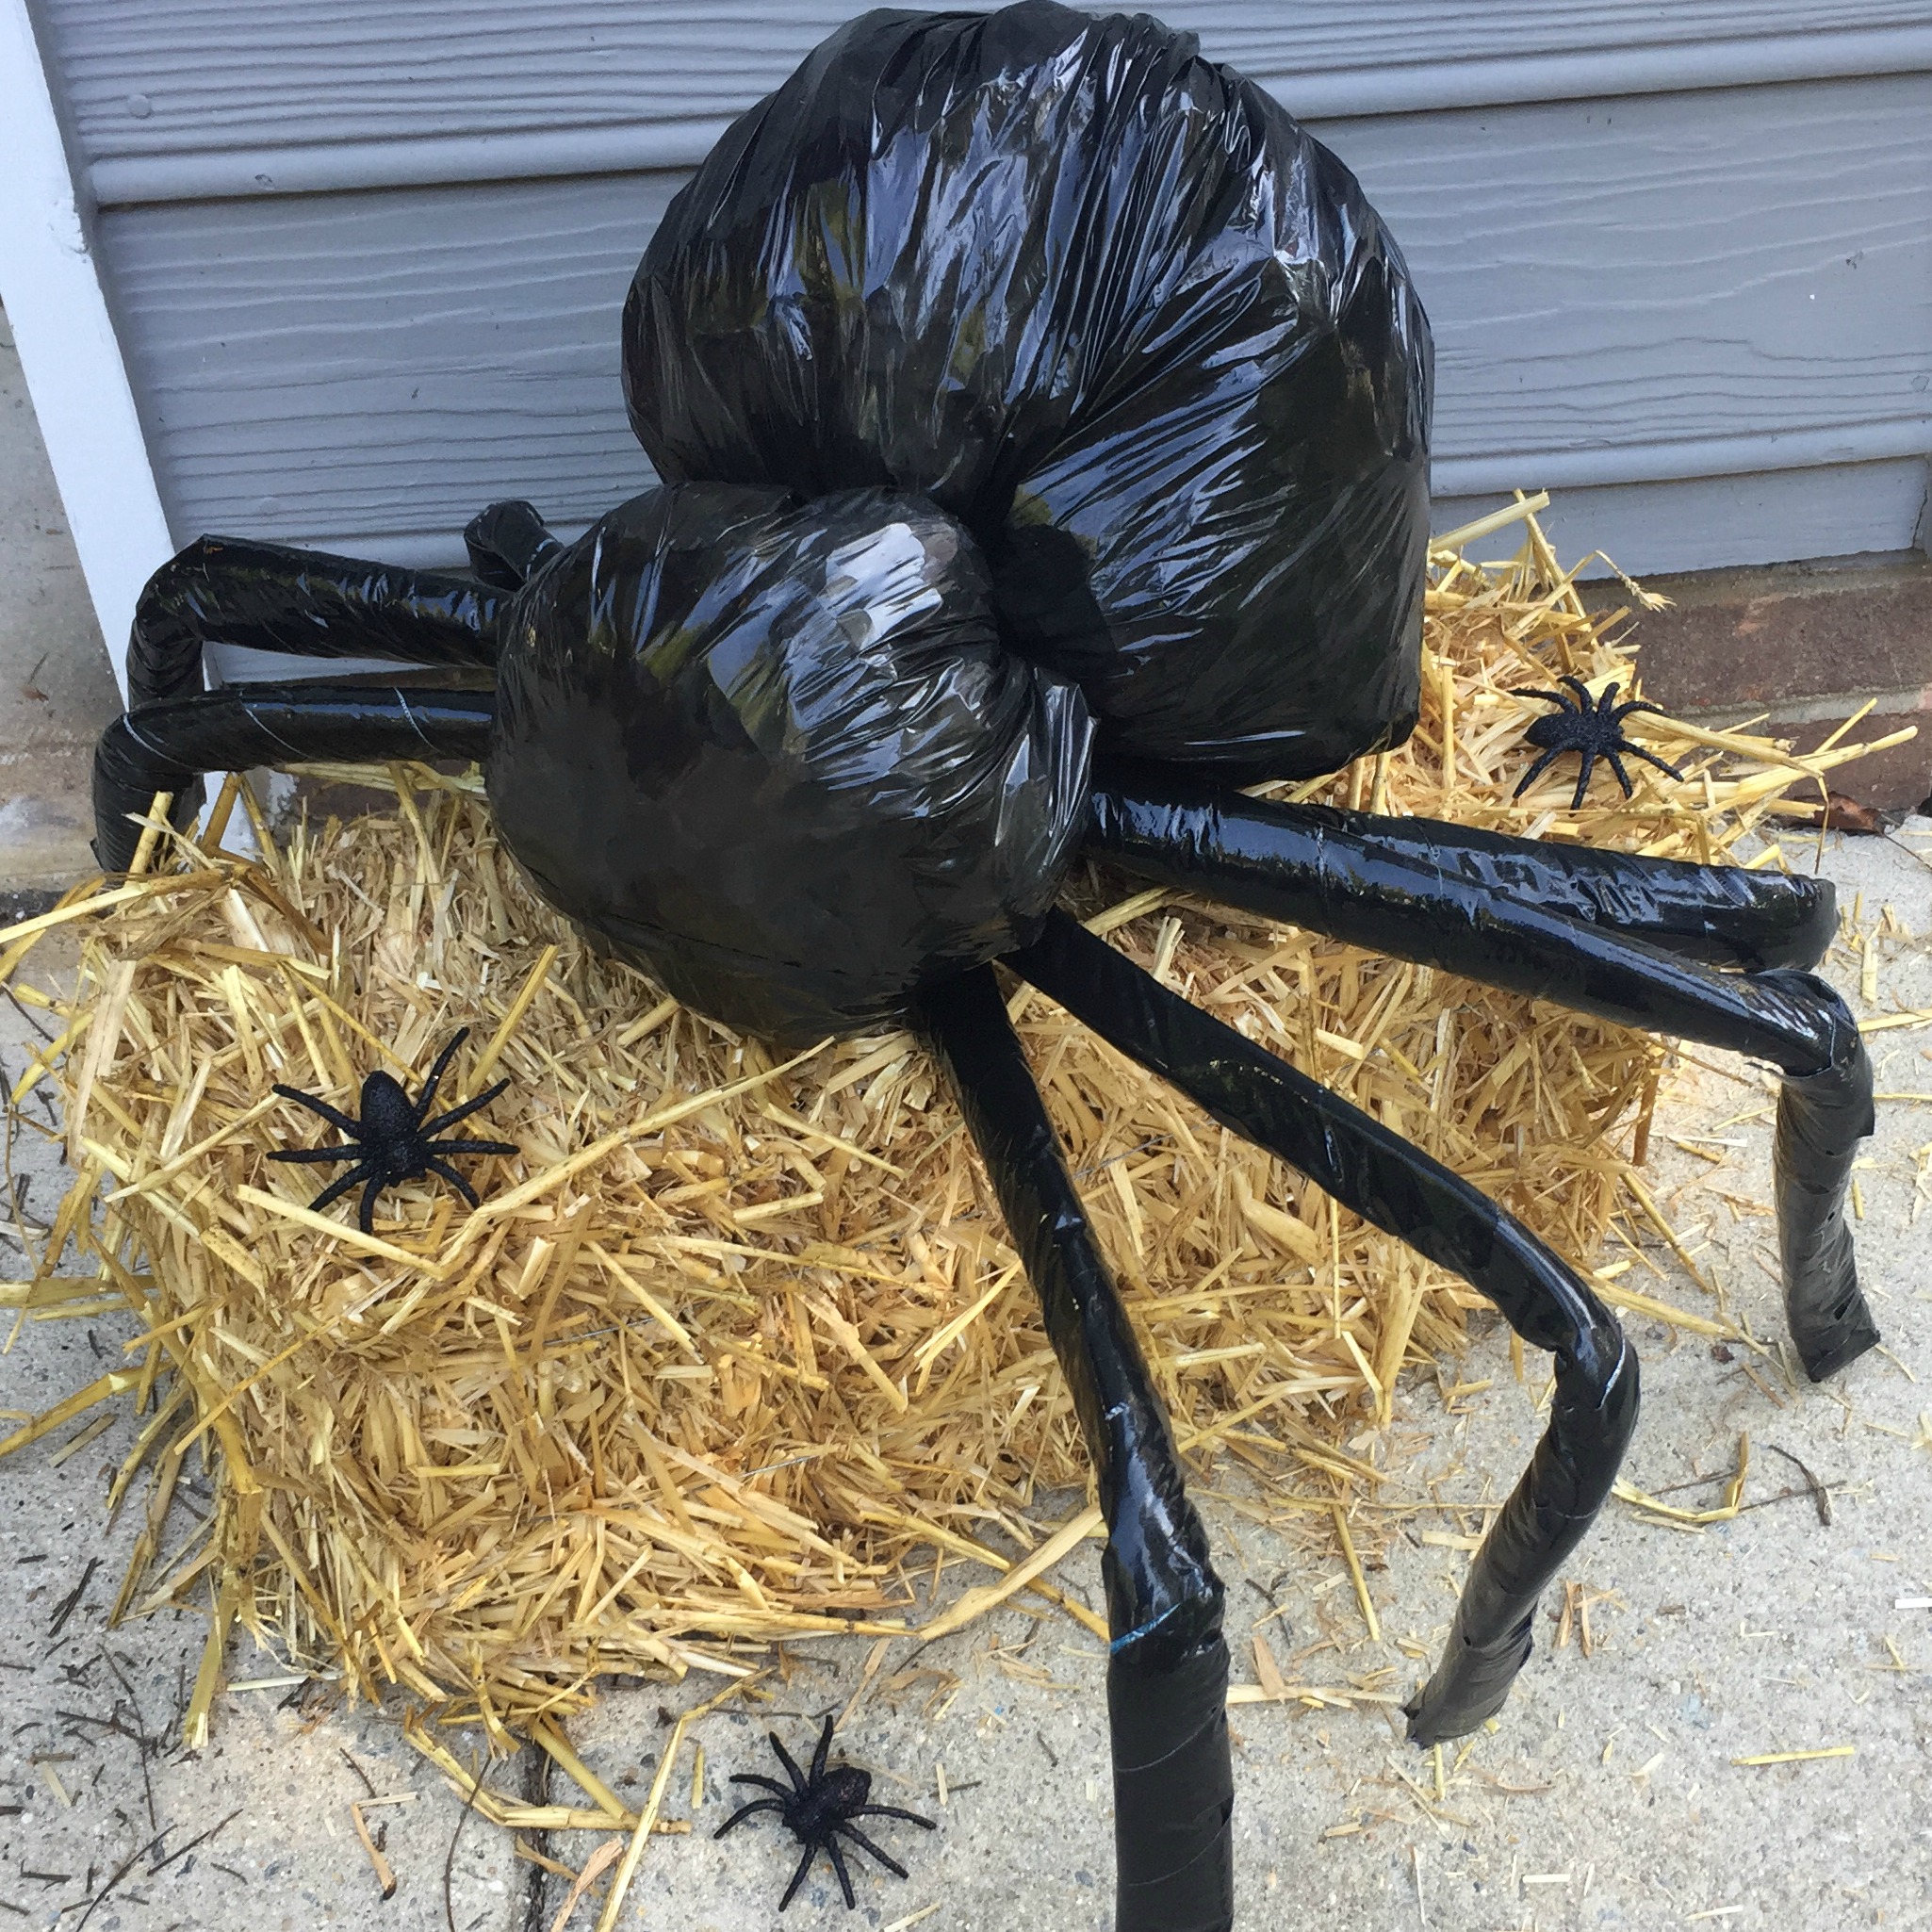 Giant Crab Spider On Trash Can